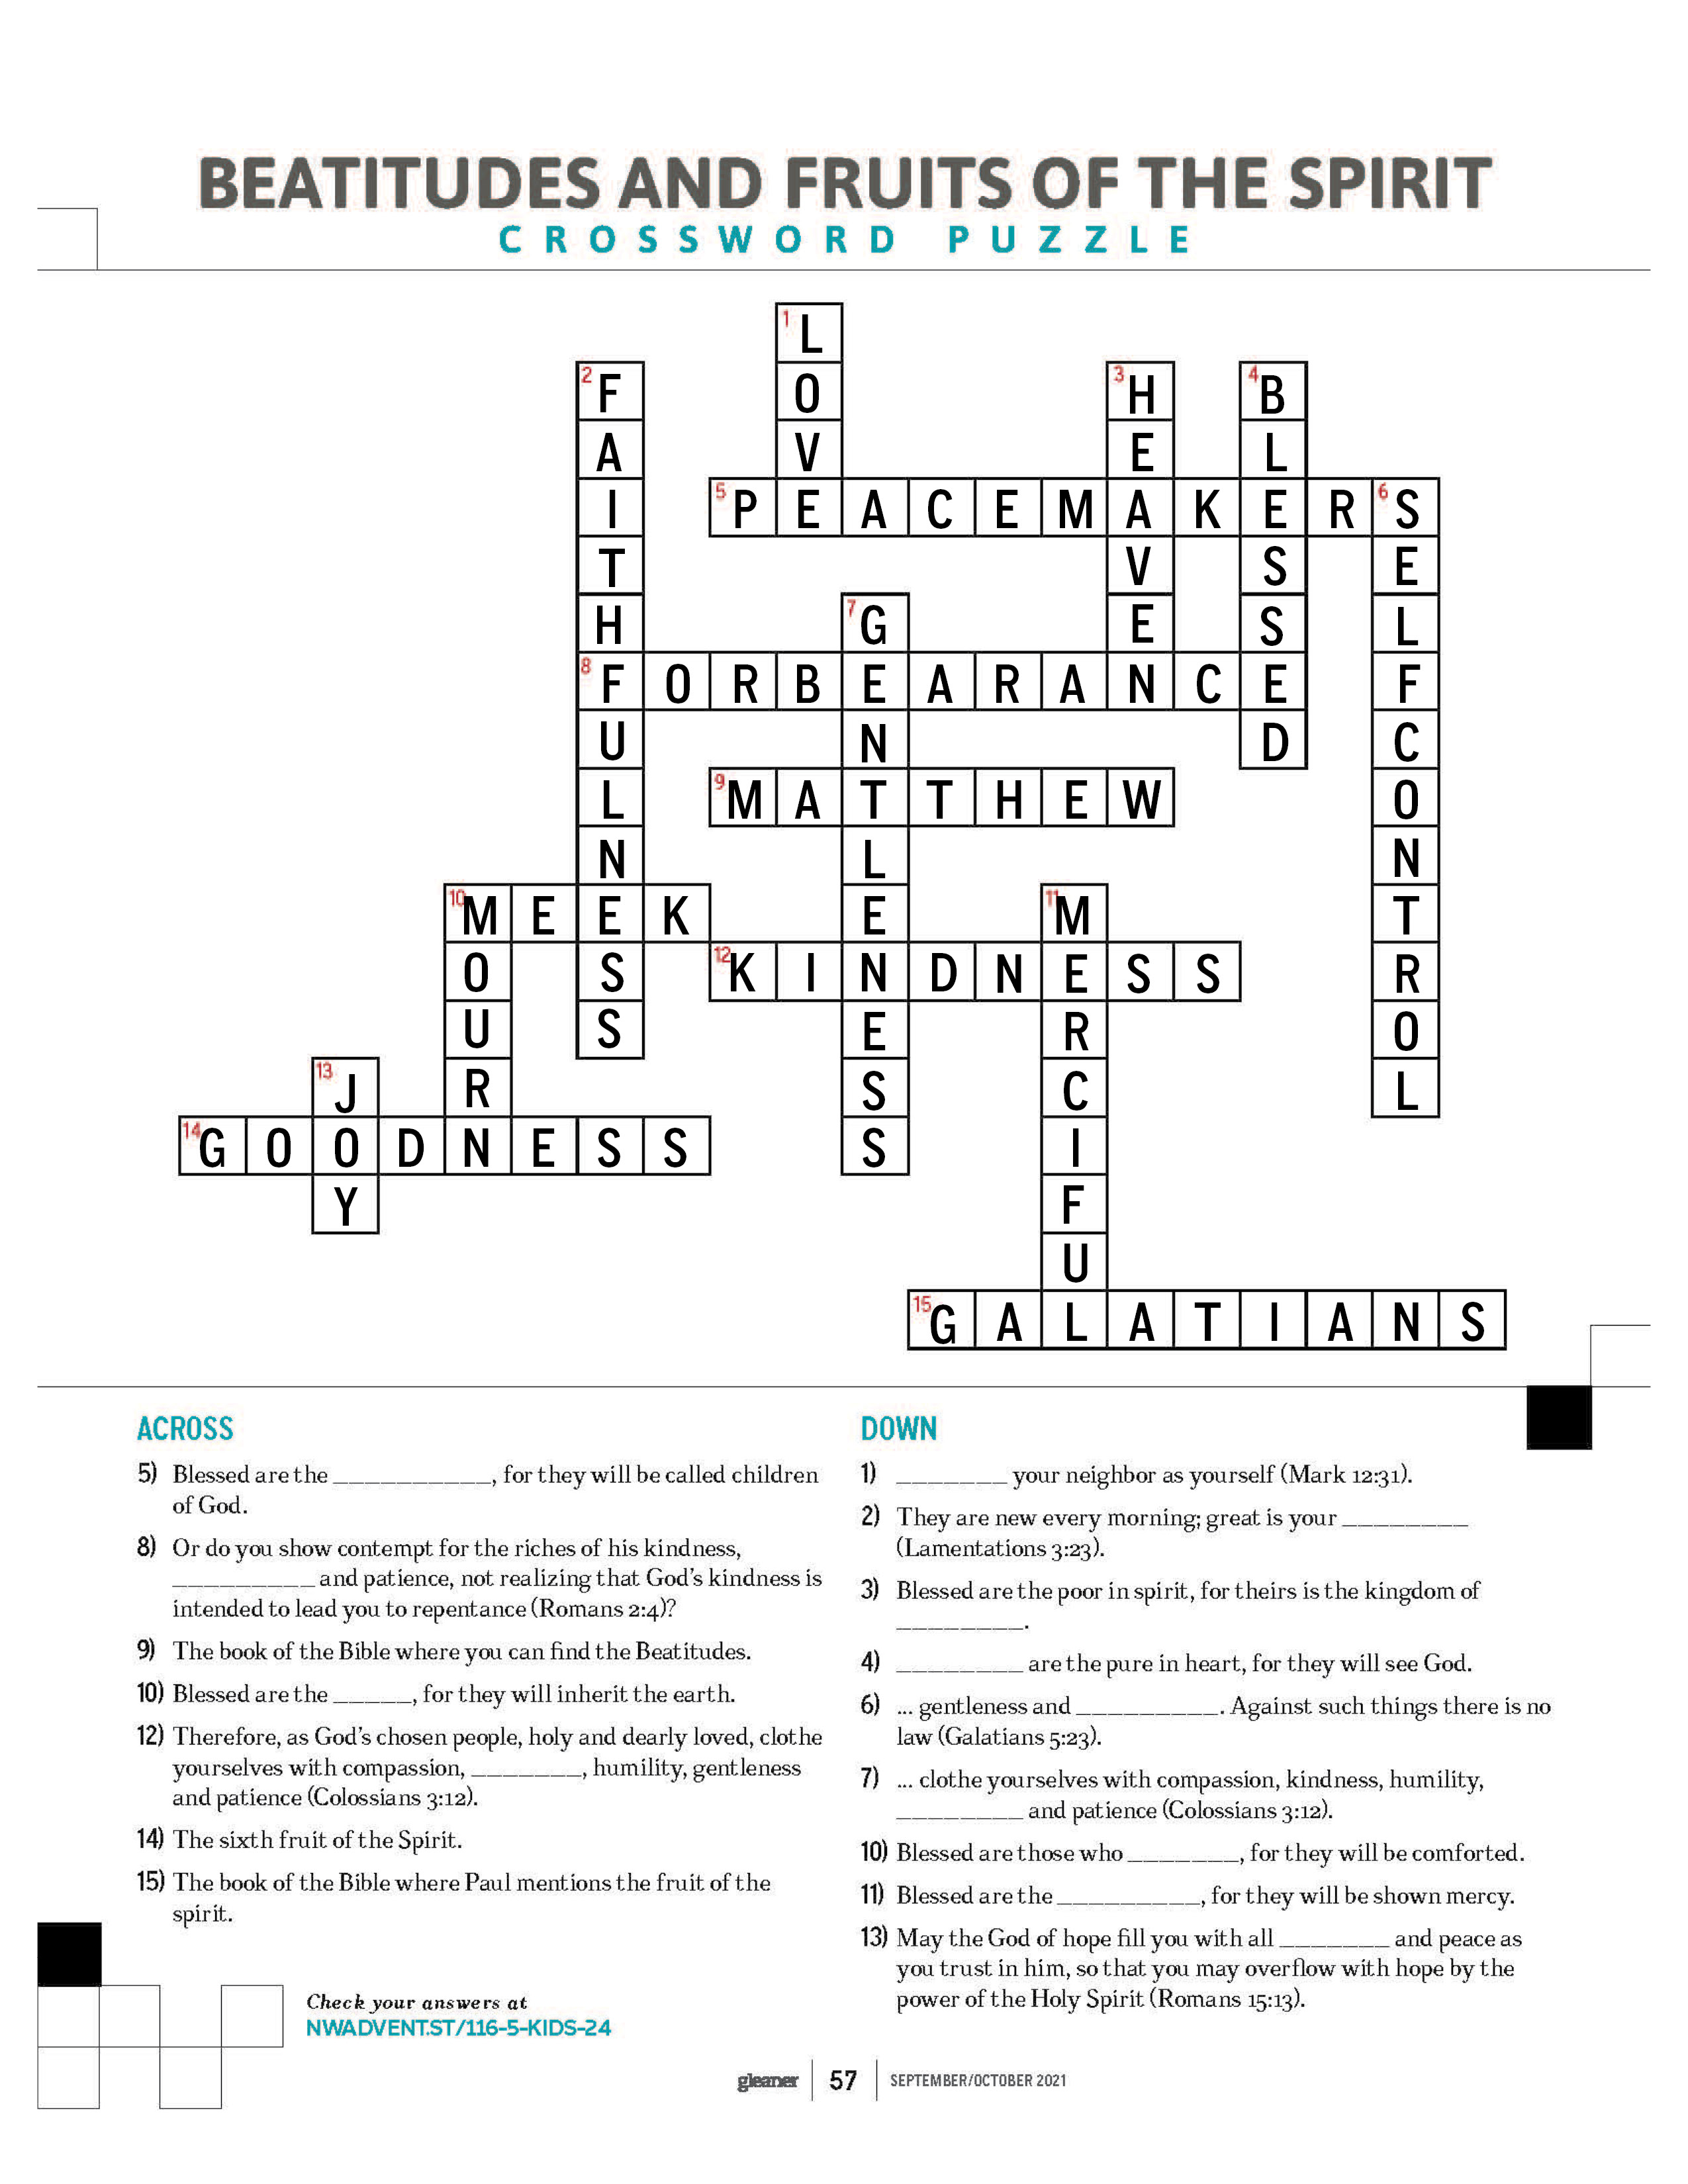 Beatitudes and Fruits of the Spirit Crossword Puzzle Just for Kids